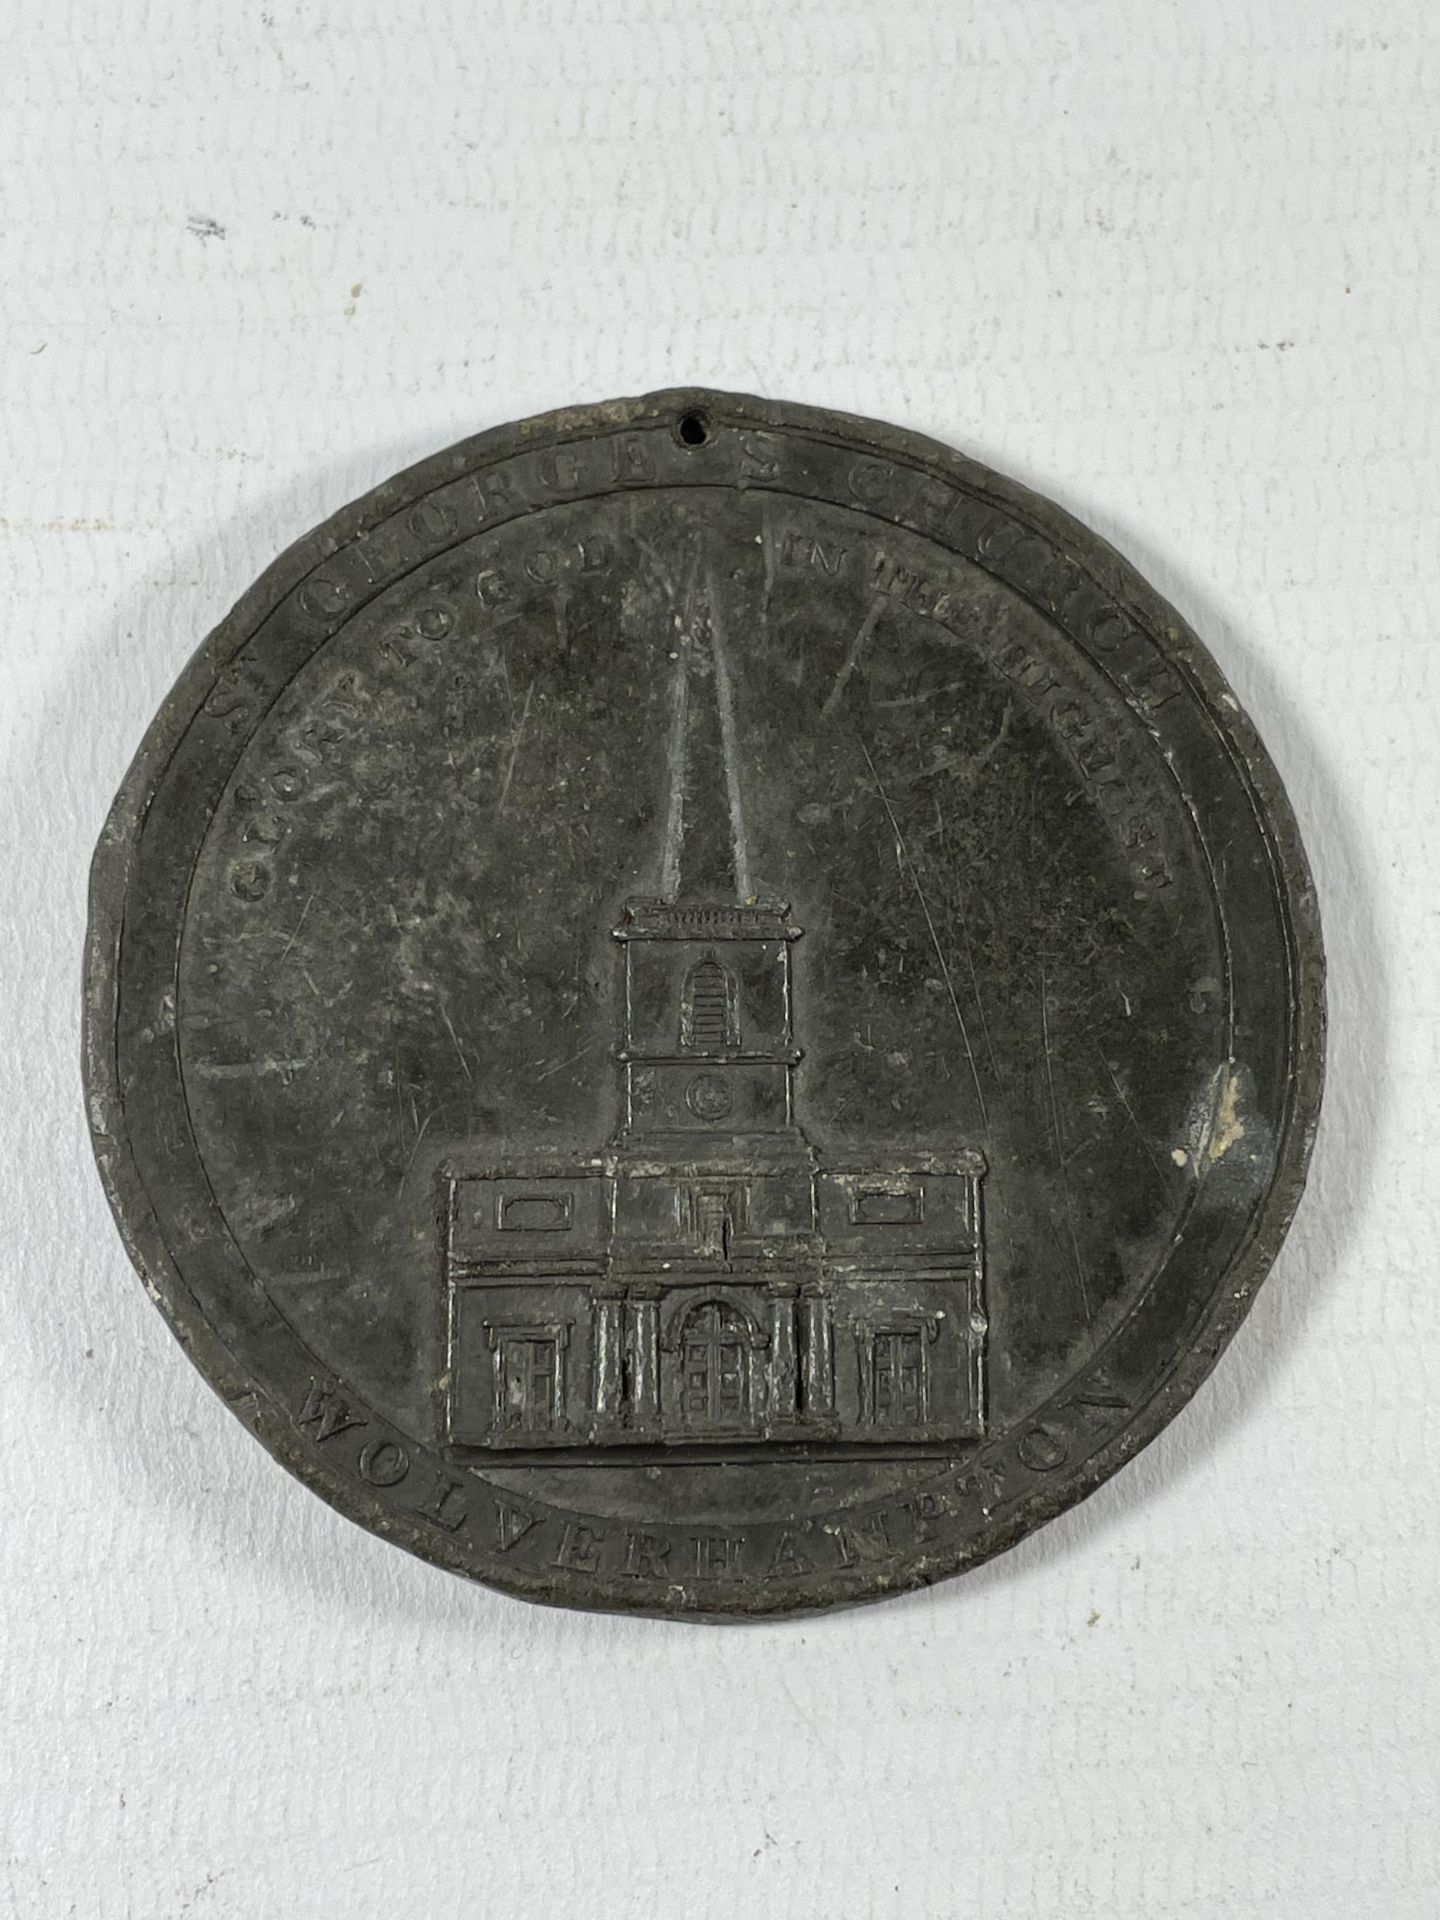 A MEDAL TO COMMEMORATE ST GEORGE'S CHURCH, WOLVERHAMPTON